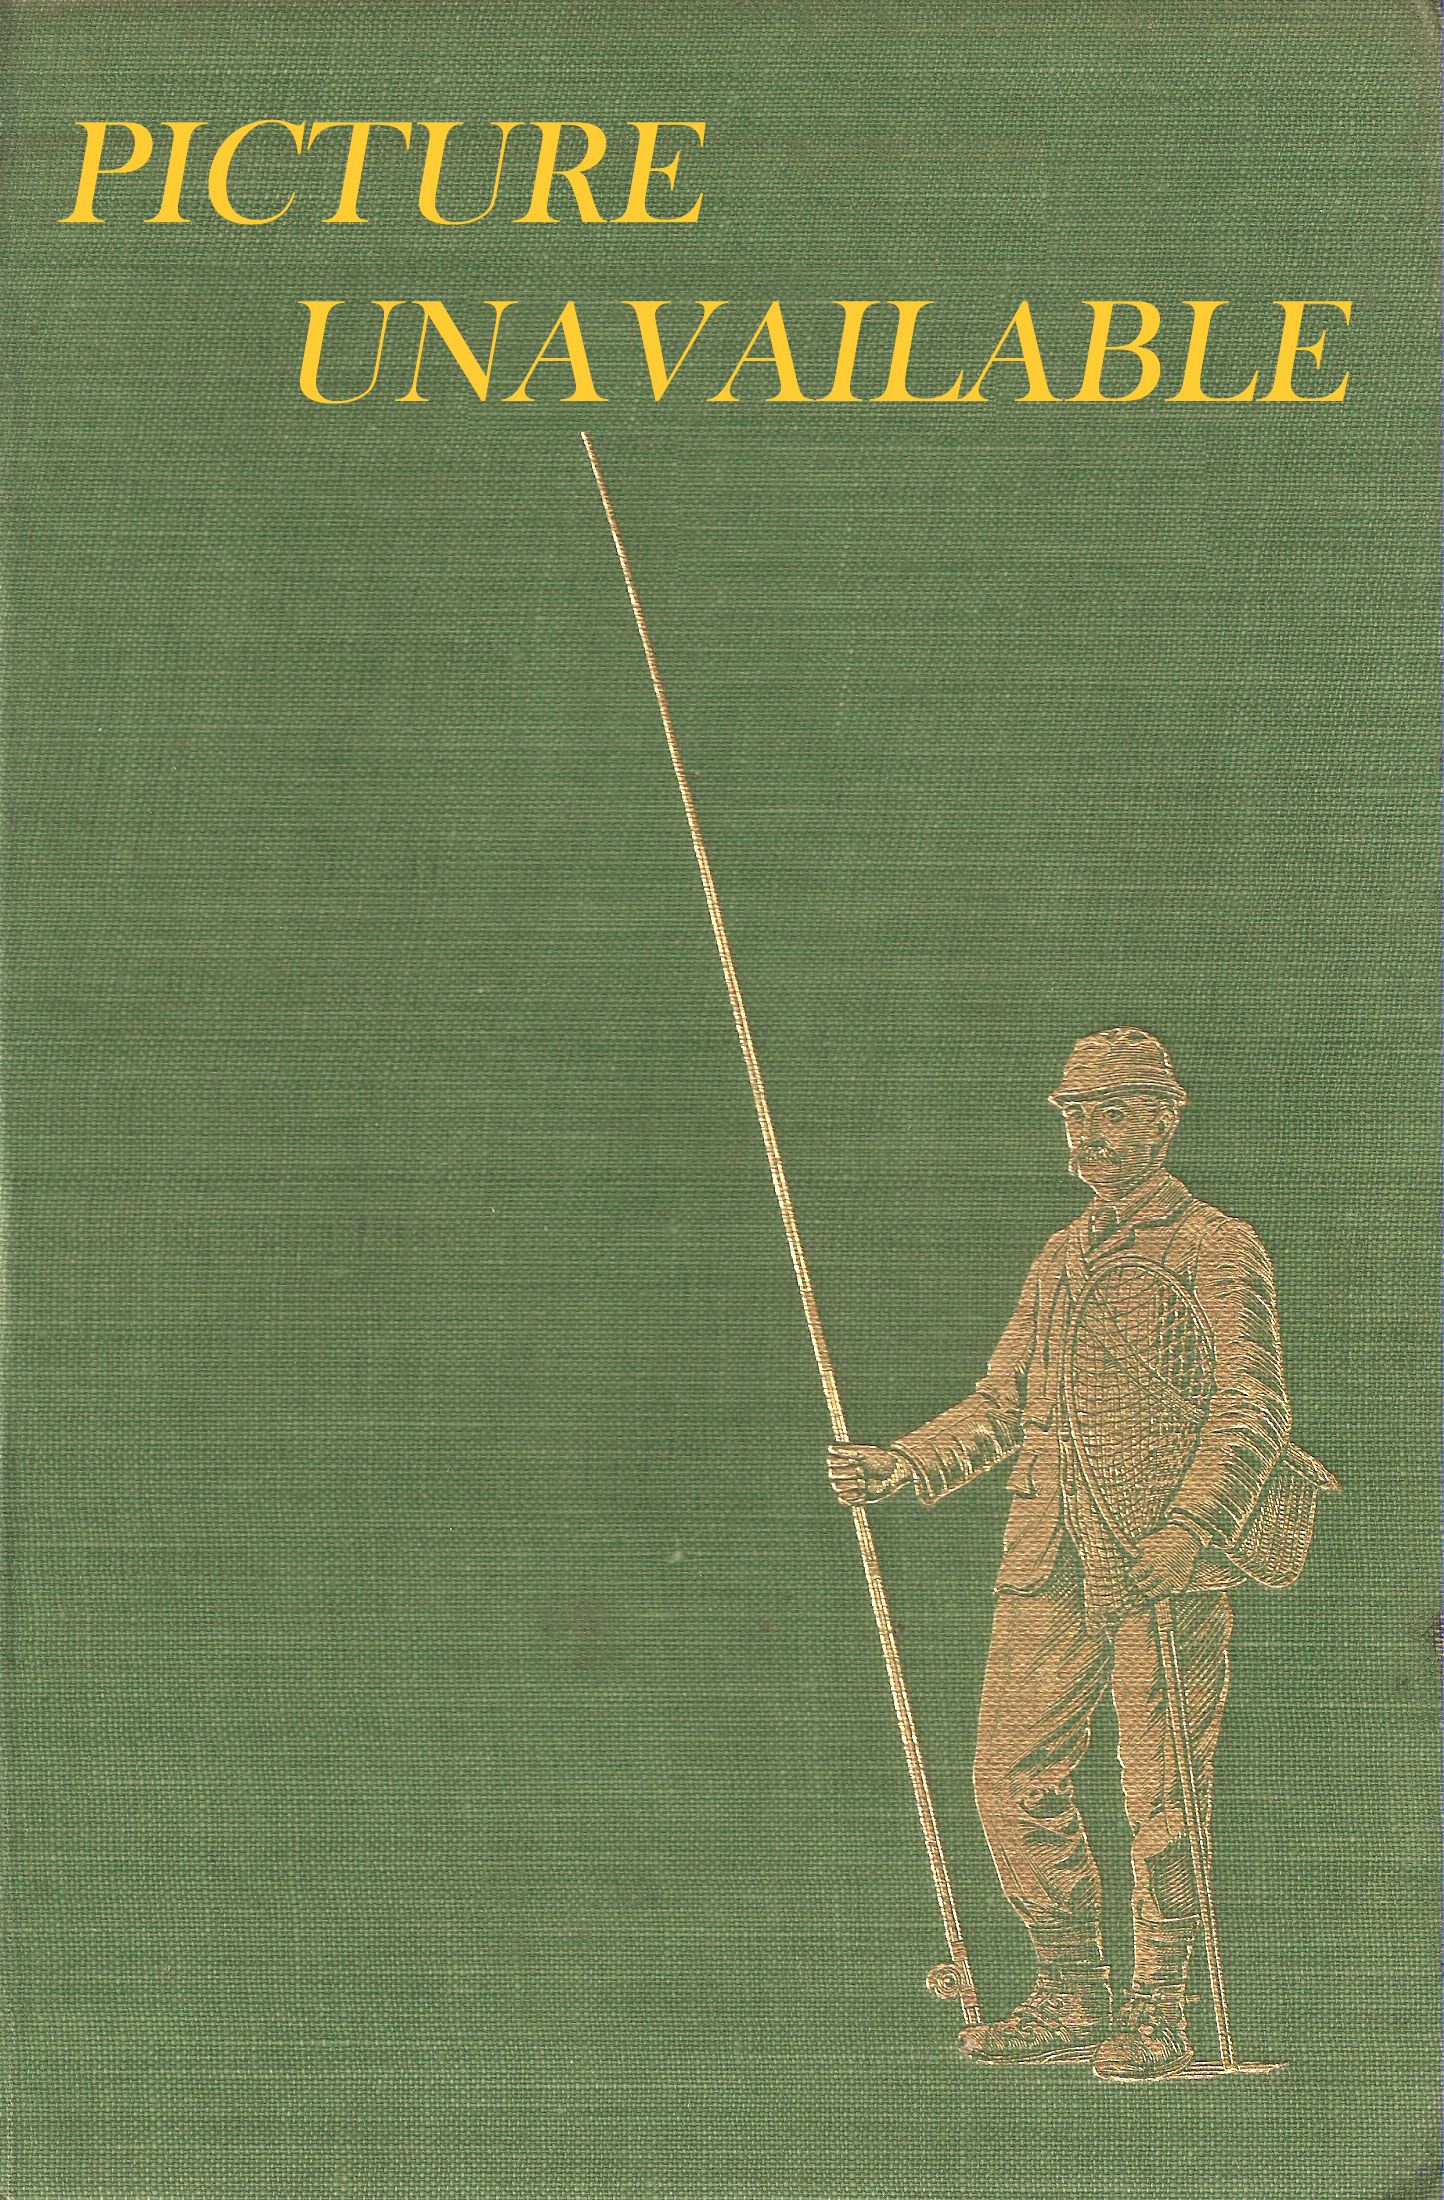 THE KEEPER'S BOOK: A GUIDE TO THE DUTIES OF A GAMEKEEPER. By Sir Peter Jeffrey Mackie, Bart.